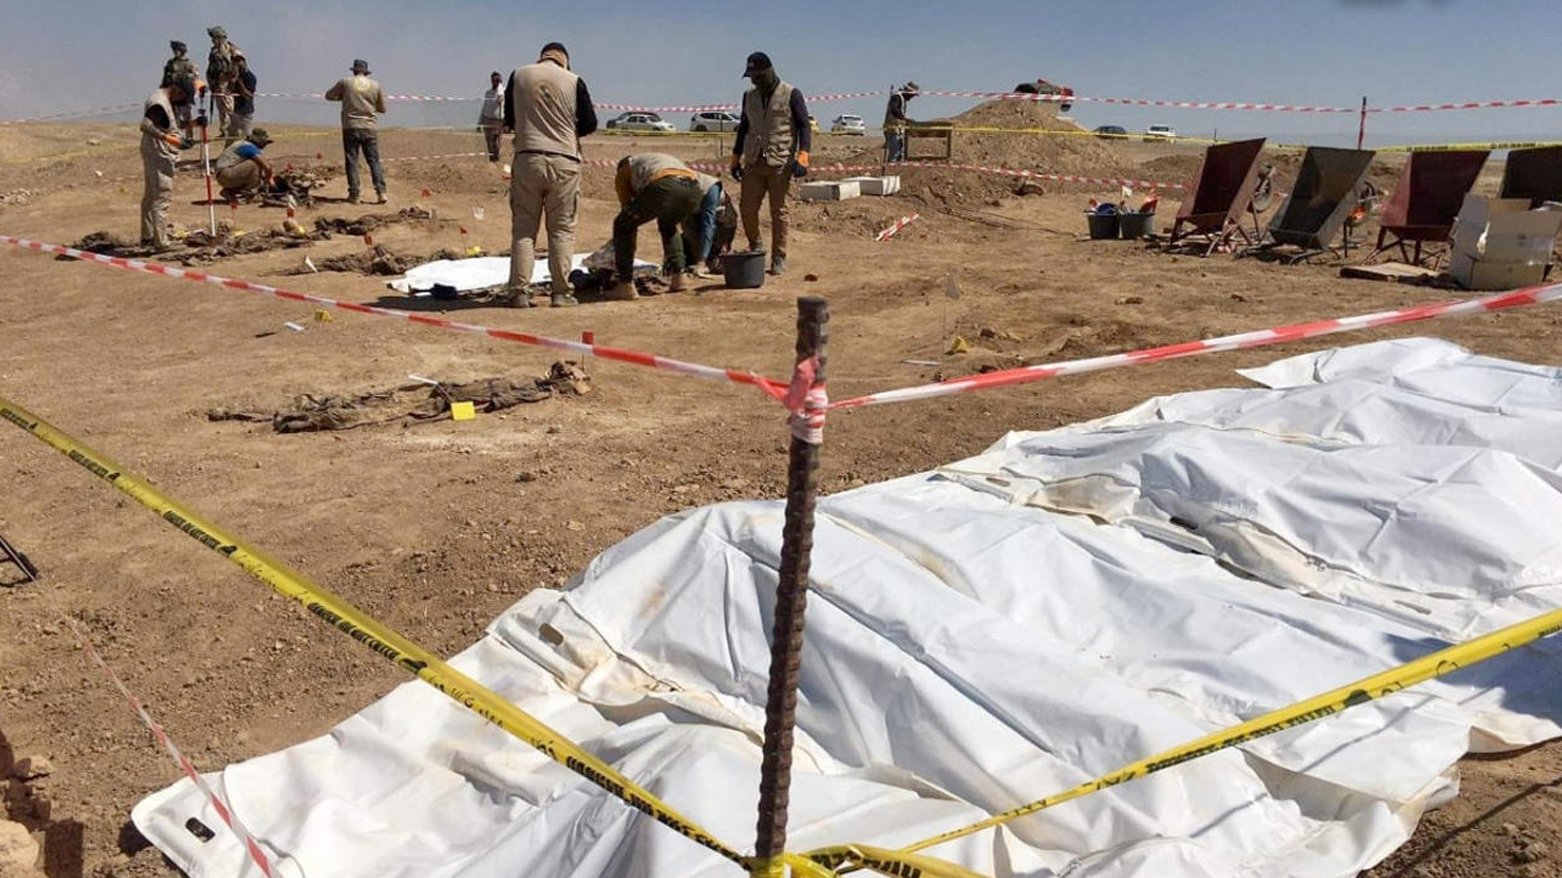  Mass graves exhumed in Iraq